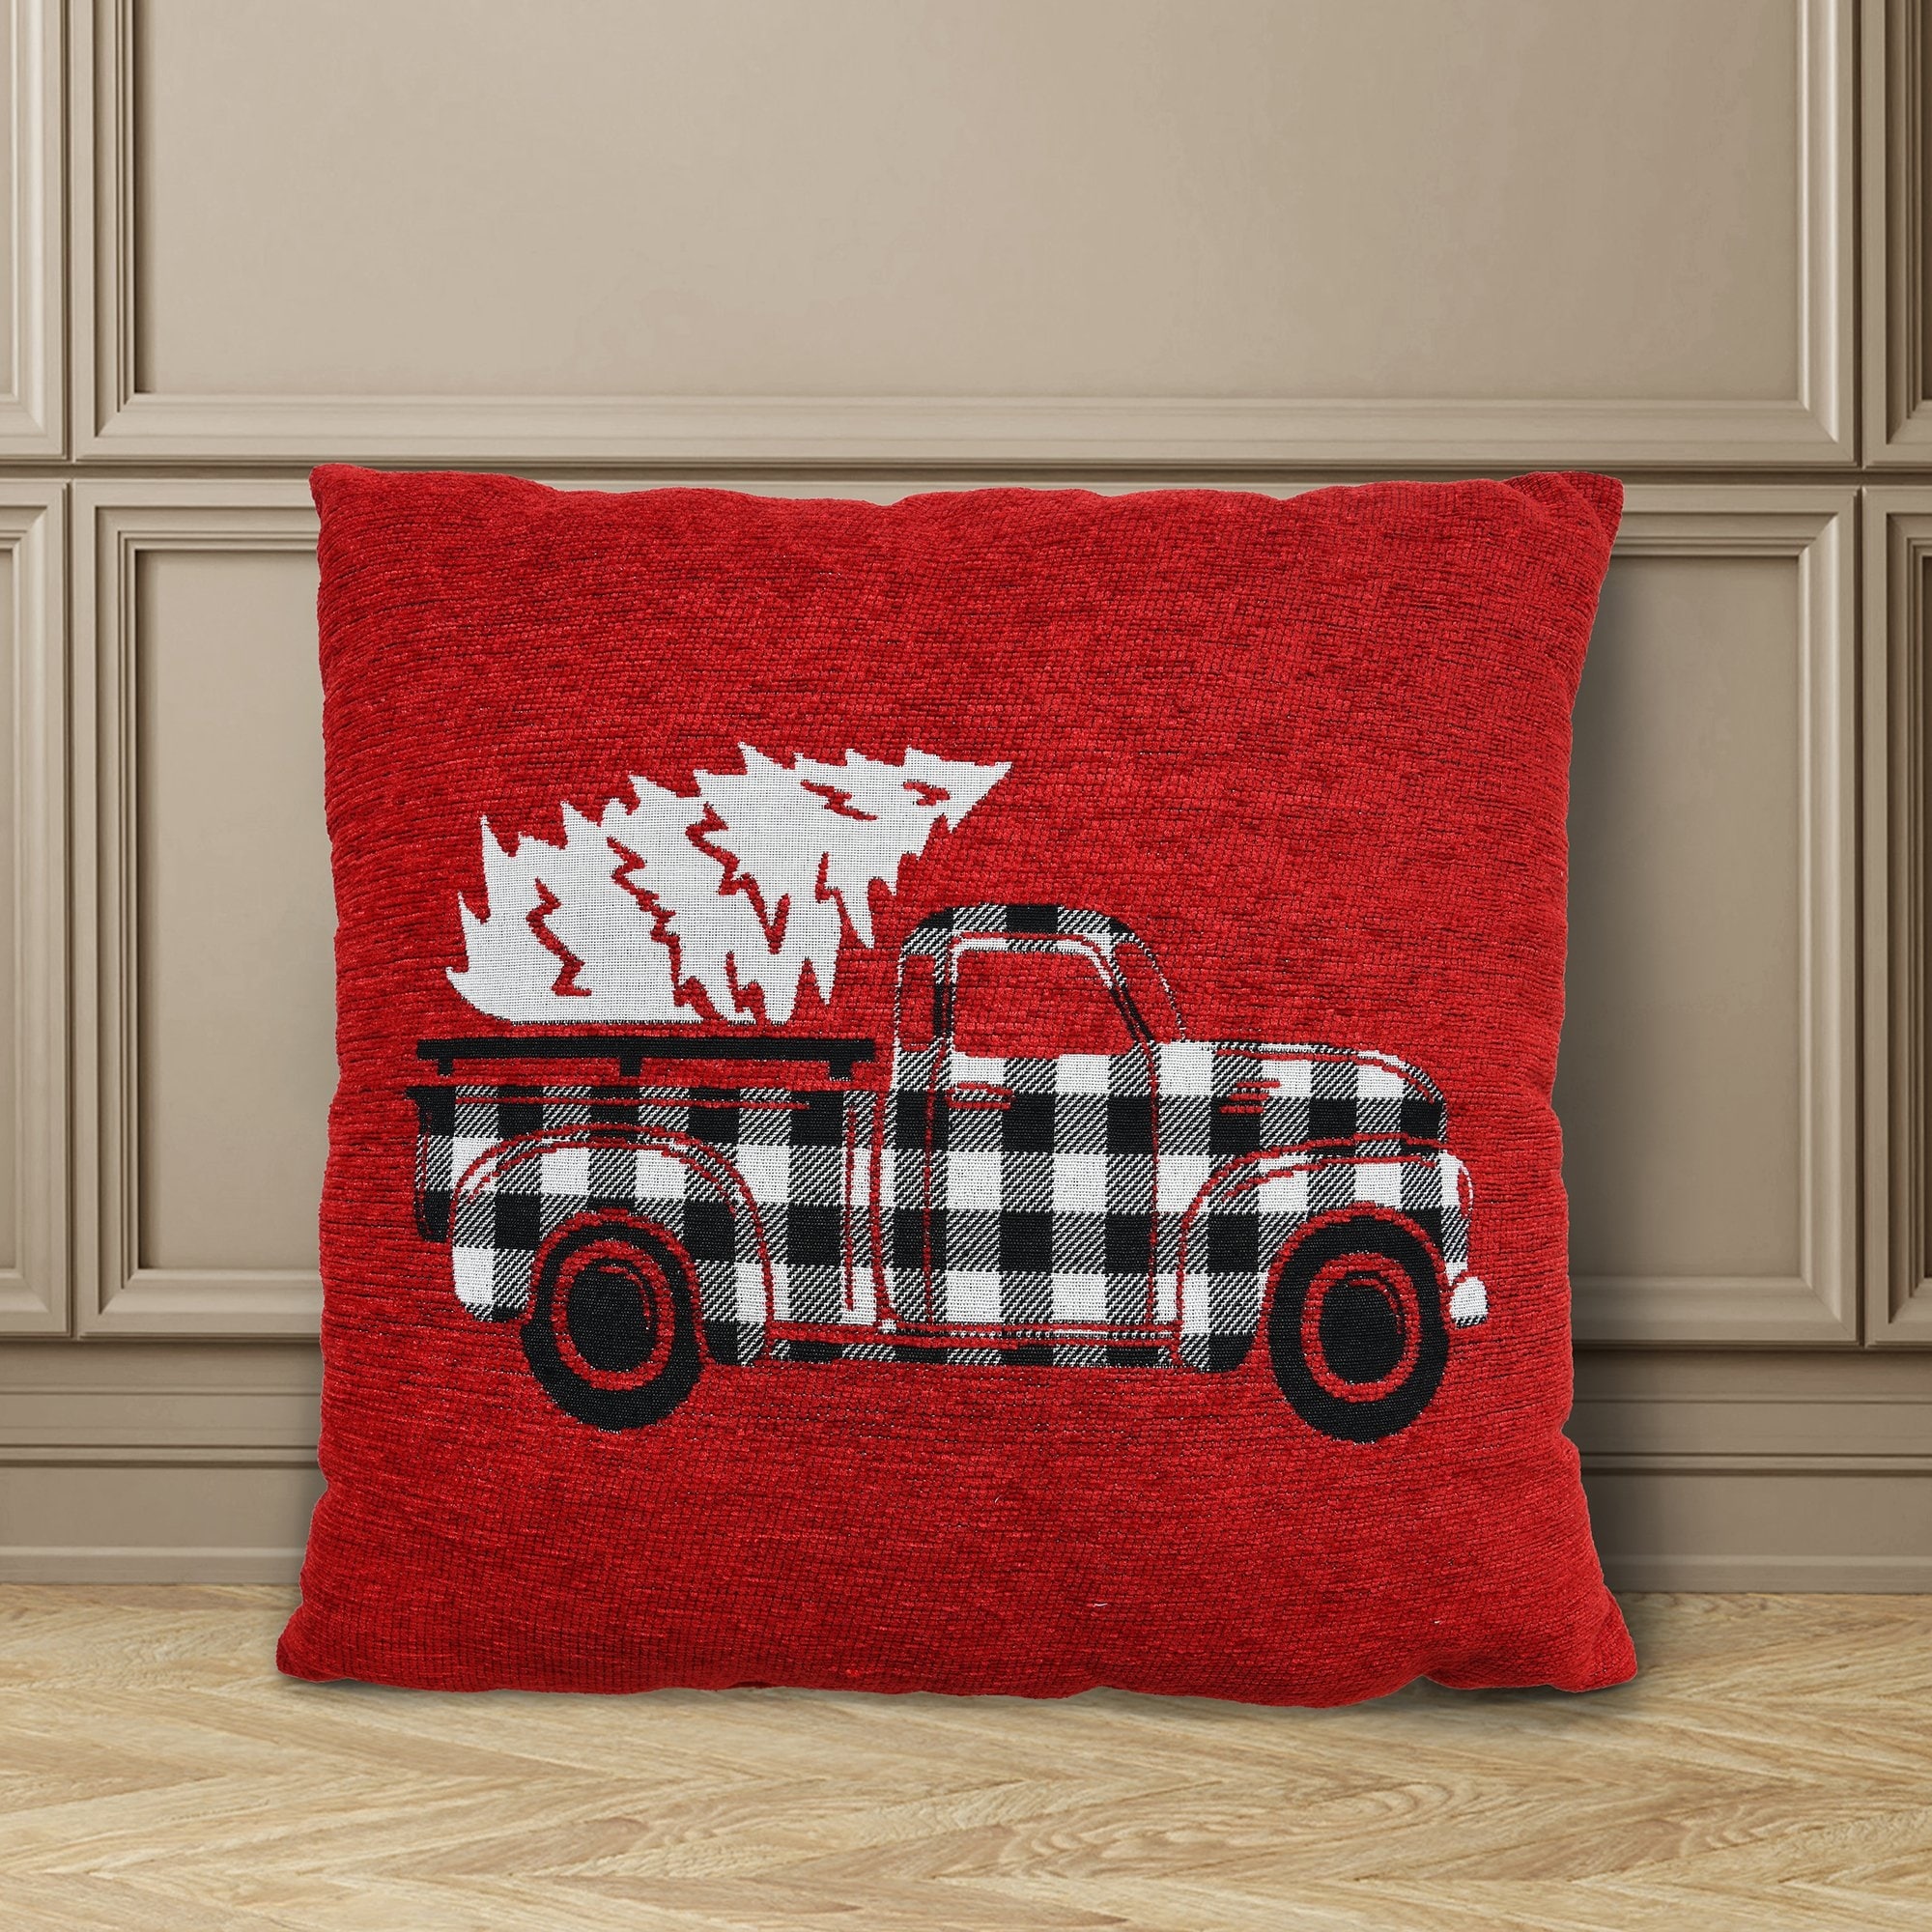 https://ak1.ostkcdn.com/images/products/is/images/direct/c321fb07000130907923b075ace7ed0694fb61ca/Farmhouse-Truck-Christmas-Pillow.jpg